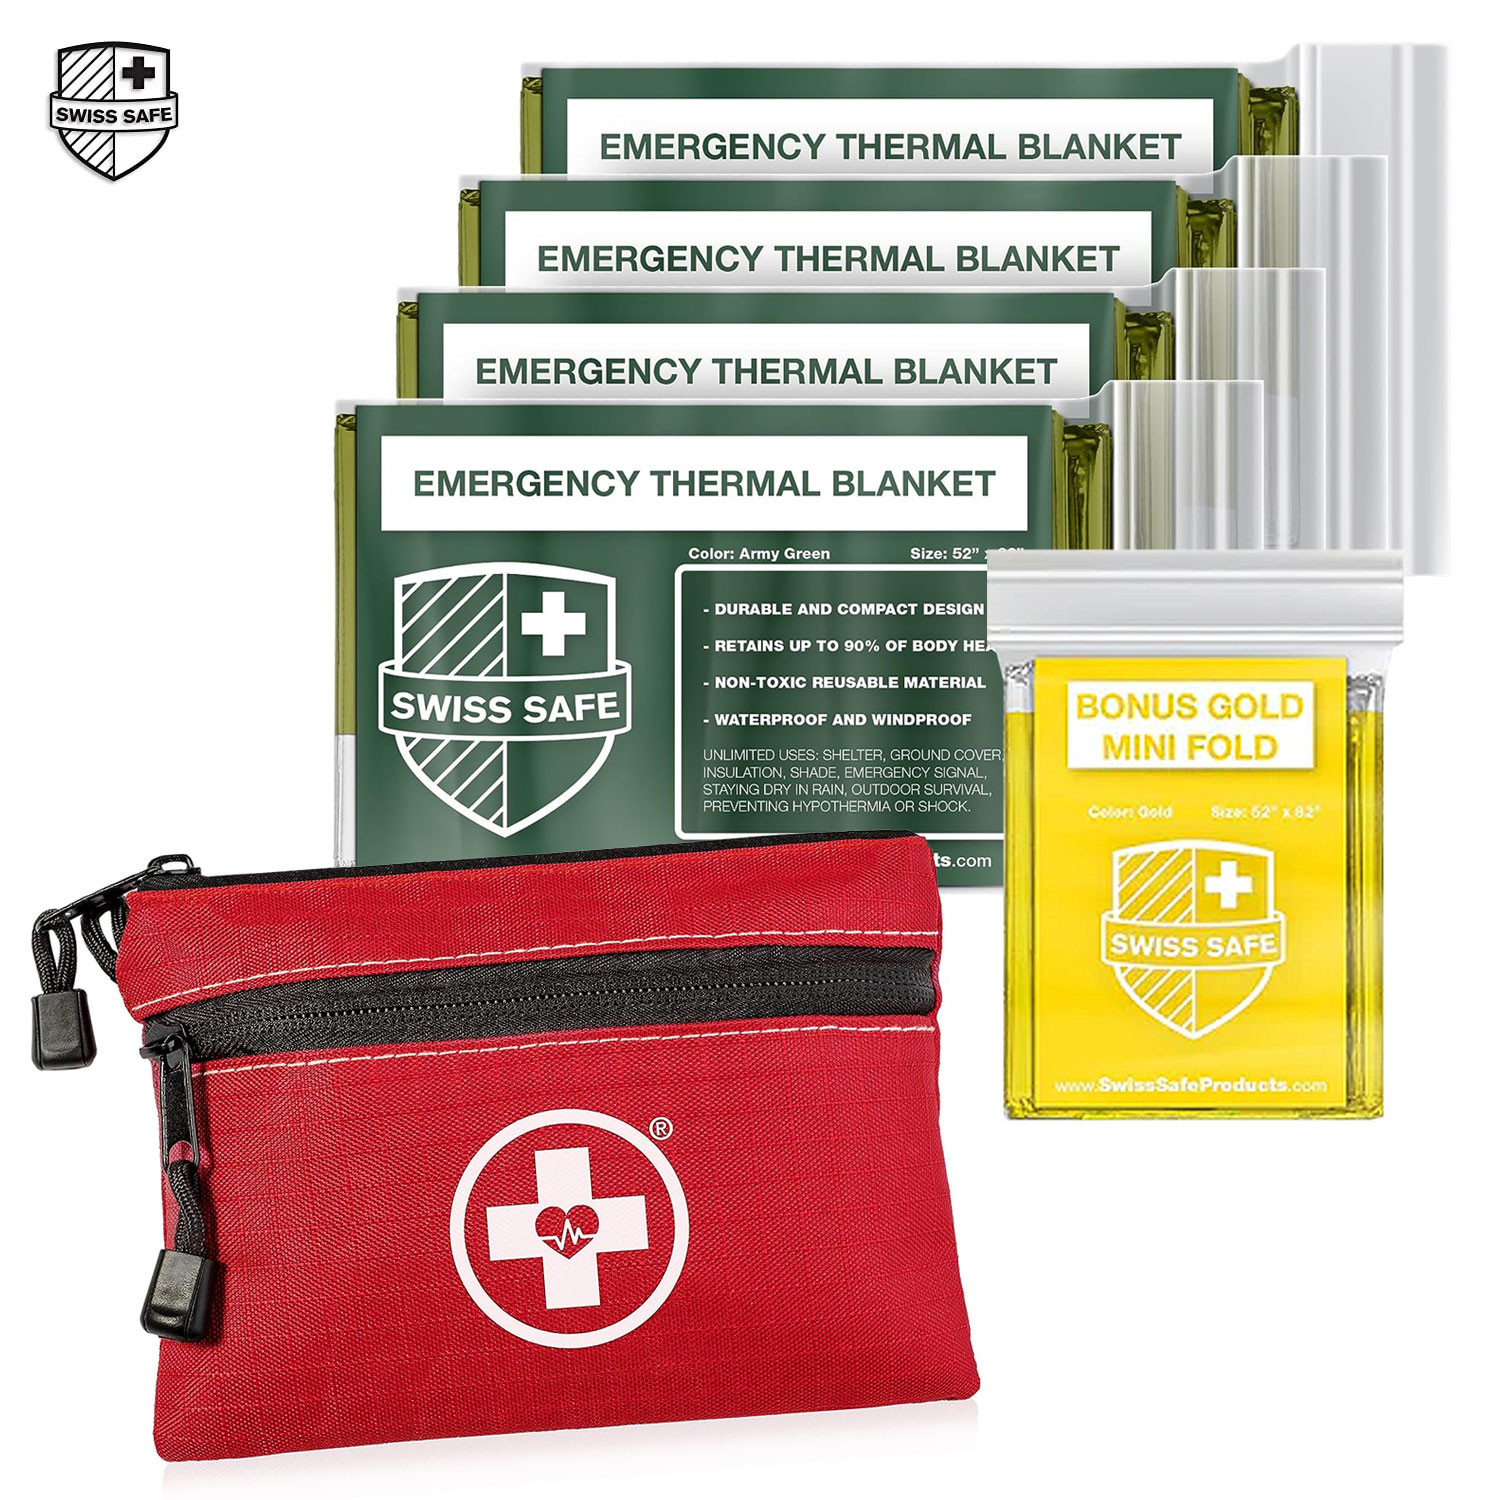 Swiss Safe 64 pc. First Aid Kit & 5-Blankets Combo $12.99 + Free Shipping